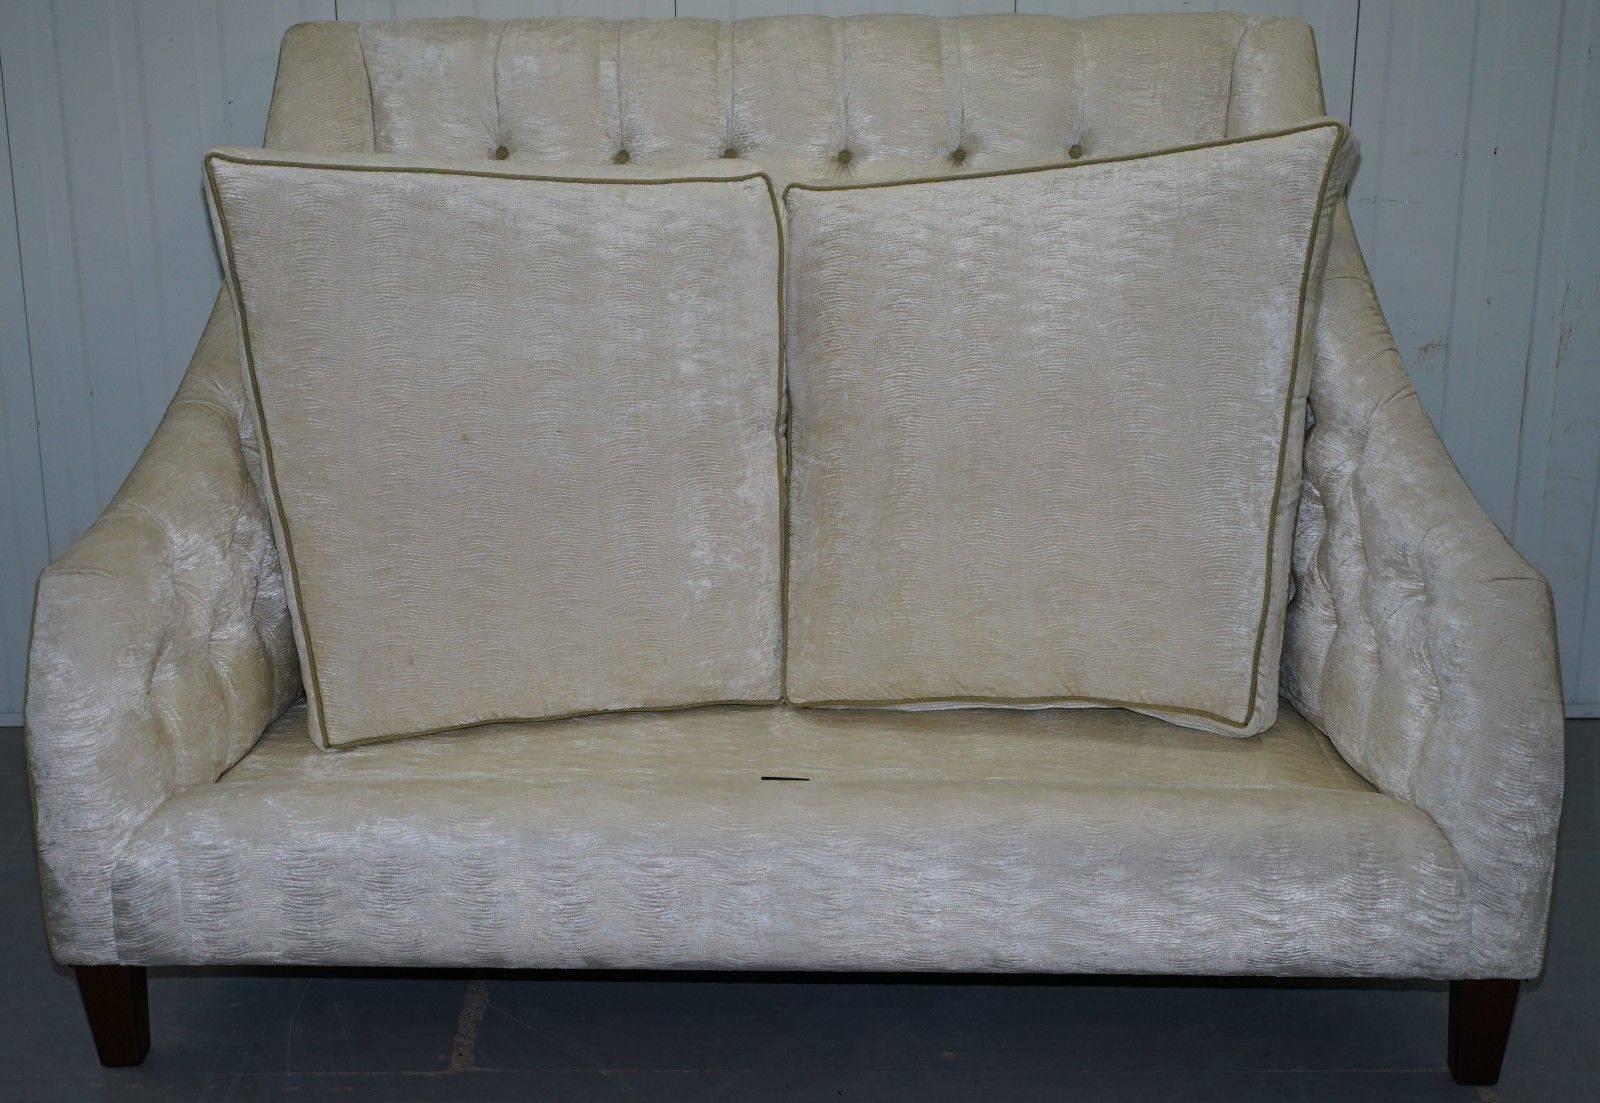 Modern Exdisplay Charlotte James Sofa Made in Edinburgh Chesterfield Buttoned